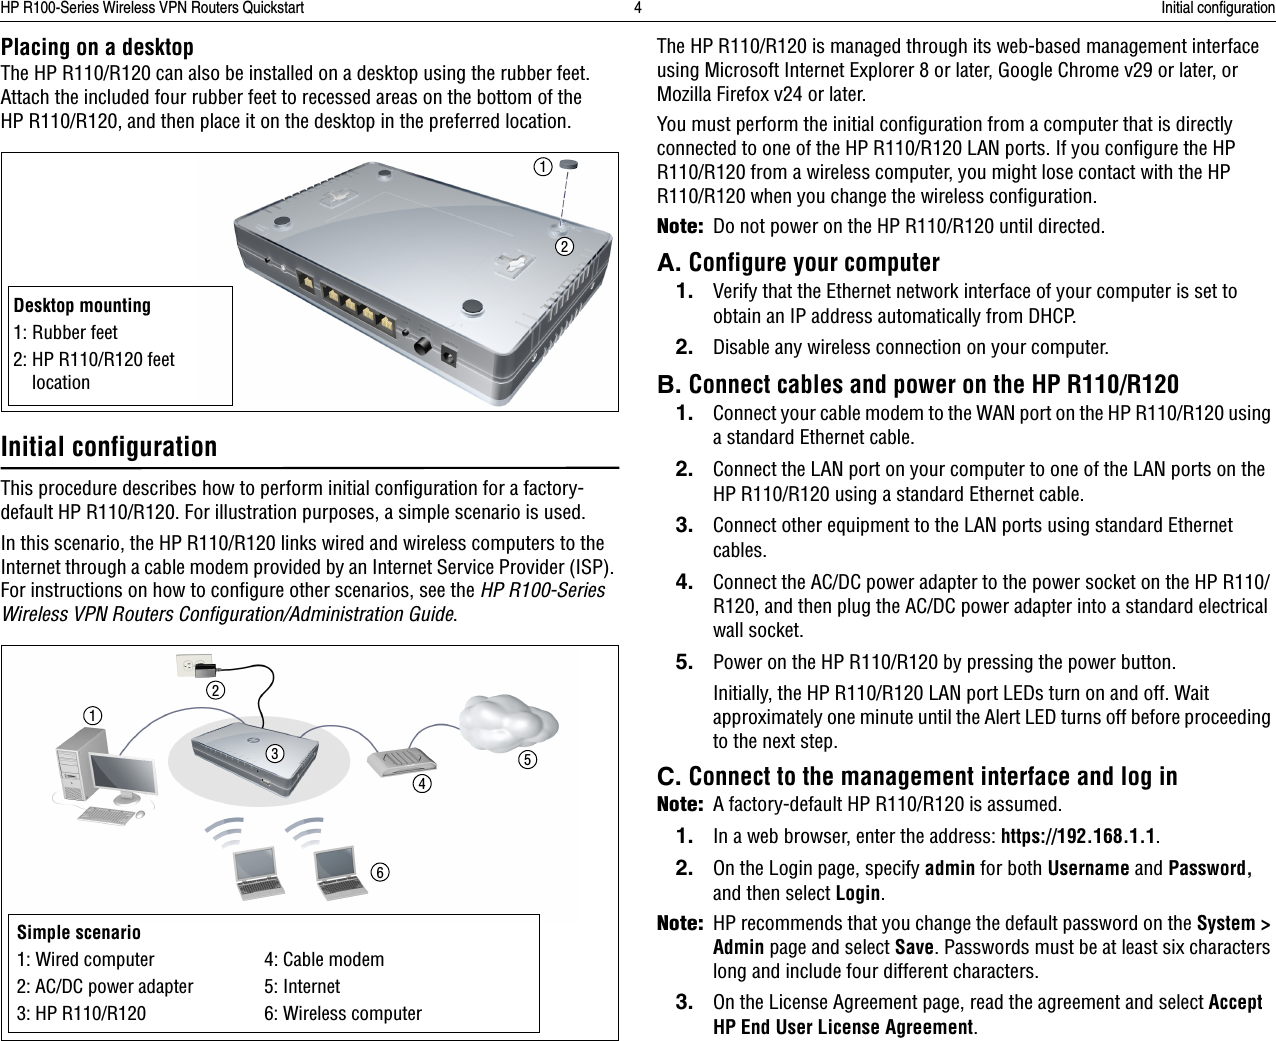 HP R100-Series Wireless VPN Routers Quickstart 4 Initial configurationPlacing on a desktopThe HP R110/R120 can also be installed on a desktop using the rubber feet. Attach the included four rubber feet to recessed areas on the bottom of the HP R110/R120, and then place it on the desktop in the preferred location.Initial configurationThis procedure describes how to perform initial configuration for a factory-default HP R110/R120. For illustration purposes, a simple scenario is used.In this scenario, the HP R110/R120 links wired and wireless computers to the Internet through a cable modem provided by an Internet Service Provider (ISP). For instructions on how to configure other scenarios, see the HP R100-Series Wireless VPN Routers Configuration/Administration Guide.The HP R110/R120 is managed through its web-based management interface using Microsoft Internet Explorer 8 or later, Google Chrome v29 or later, or Mozilla Firefox v24 or later. You must perform the initial configuration from a computer that is directly connected to one of the HP R110/R120 LAN ports. If you configure the HP R110/R120 from a wireless computer, you might lose contact with the HP R110/R120 when you change the wireless configuration.Note:Do not power on the HP R110/R120 until directed.A. Configure your computer1. Verify that the Ethernet network interface of your computer is set to obtain an IP address automatically from DHCP. 2. Disable any wireless connection on your computer.B. Connect cables and power on the HP R110/R1201. Connect your cable modem to the WAN port on the HP R110/R120 using a standard Ethernet cable.2. Connect the LAN port on your computer to one of the LAN ports on the HP R110/R120 using a standard Ethernet cable. 3. Connect other equipment to the LAN ports using standard Ethernet cables.4. Connect the AC/DC power adapter to the power socket on the HP R110/R120, and then plug the AC/DC power adapter into a standard electrical wall socket.5. Power on the HP R110/R120 by pressing the power button.Initially, the HP R110/R120 LAN port LEDs turn on and off. Wait approximately one minute until the Alert LED turns off before proceeding to the next step.C. Connect to the management interface and log inNote:A factory-default HP R110/R120 is assumed.1. In a web browser, enter the address: https://192.168.1.1.2. On the Login page, specify admin for both Username and Password, and then select Login. Note:HP recommends that you change the default password on the System &gt; Admin page and select Save. Passwords must be at least six characters long and include four different characters.3. On the License Agreement page, read the agreement and select Accept HP End User License Agreement.Desktop mounting1: Rubber feet2: HP R110/R120 feet location12Simple scenario1: Wired computer 4: Cable modem2: AC/DC power adapter 5: Internet3: HP R110/R120 6: Wireless computer123456